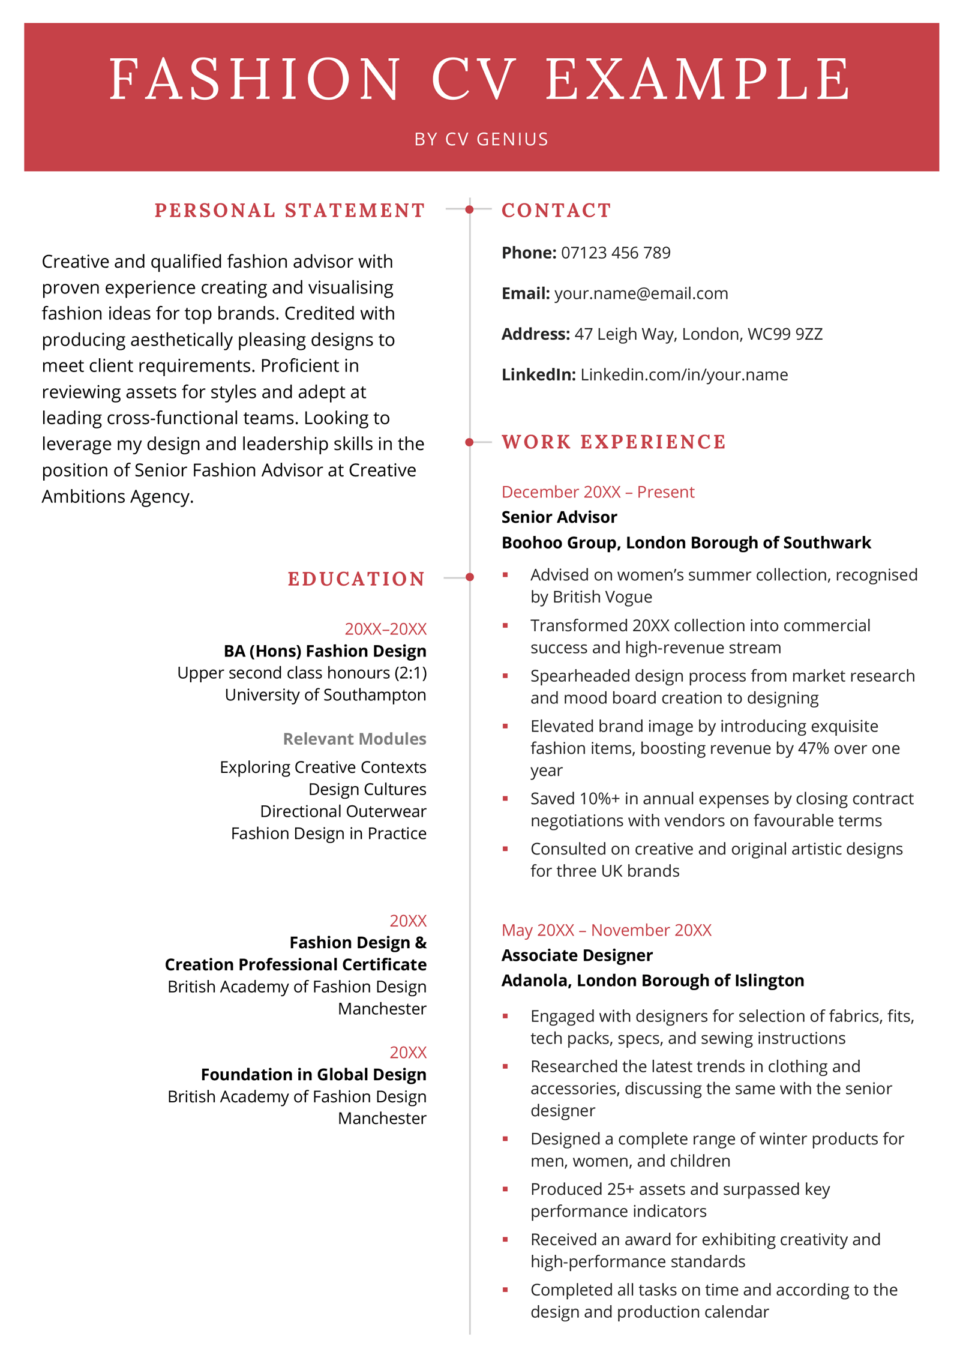 A fashion CV example that uses a creative red CV design and is arranged in a two-column CV format so that employers can see more information at once on the first page of this CV.